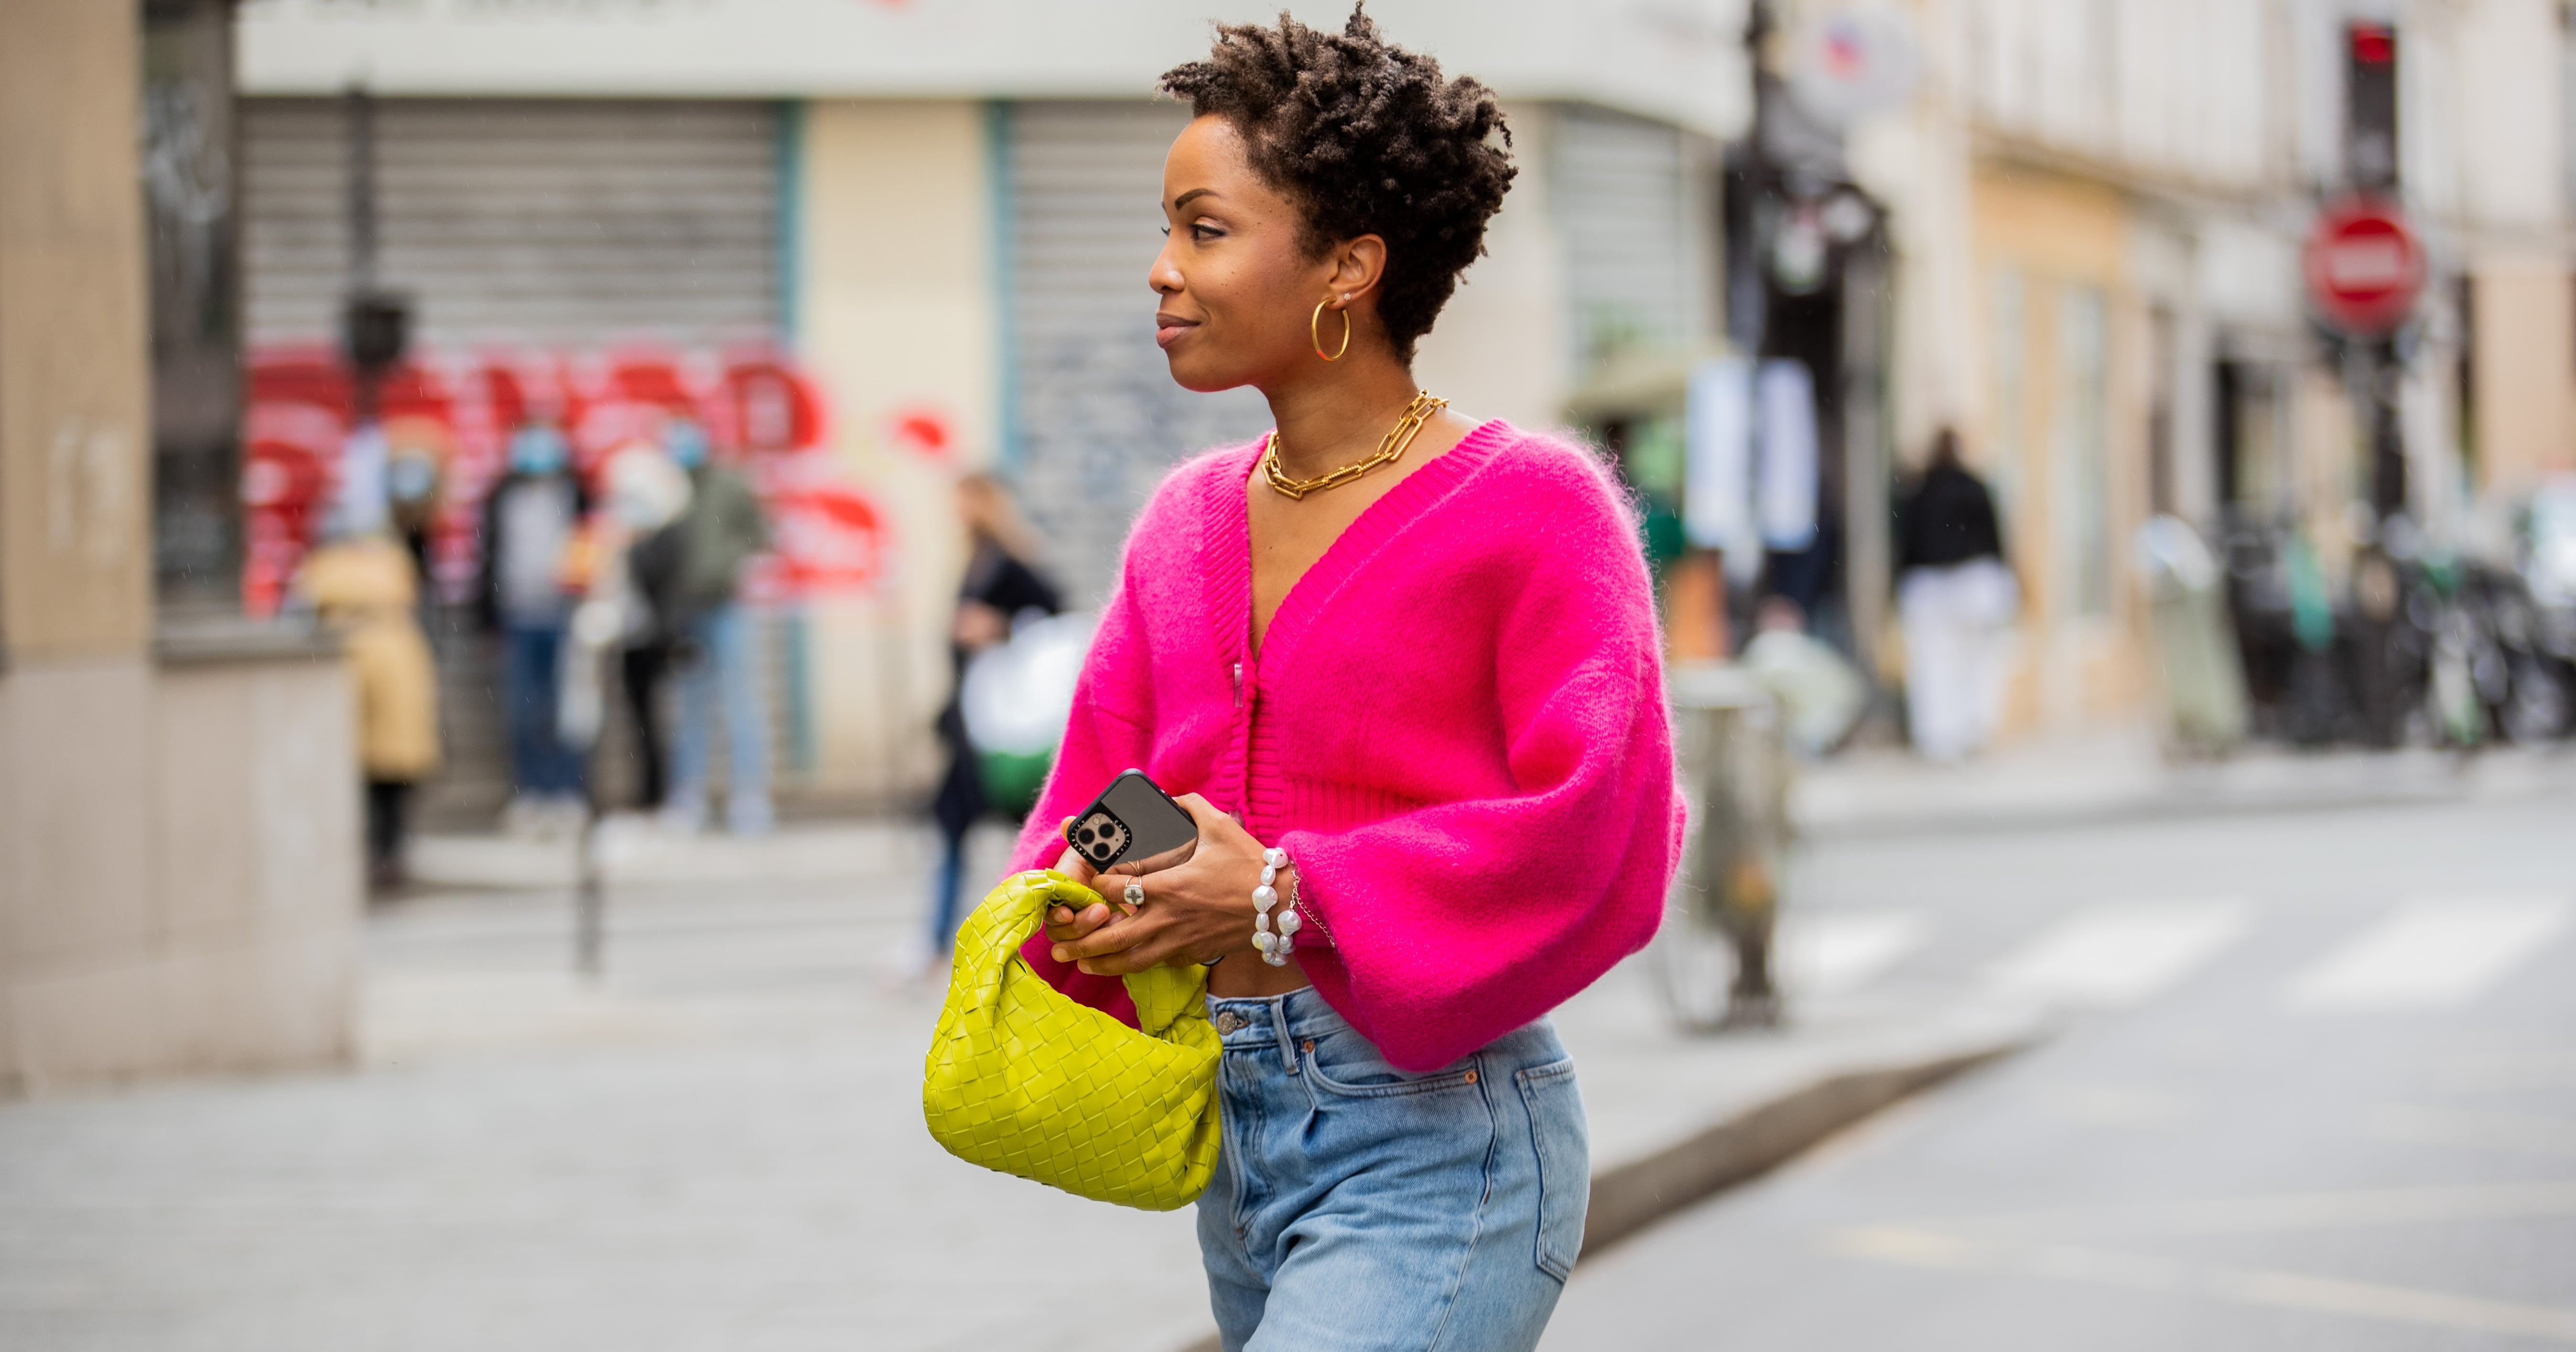 8 Sweater Trends You'll See Everywhere This Winter